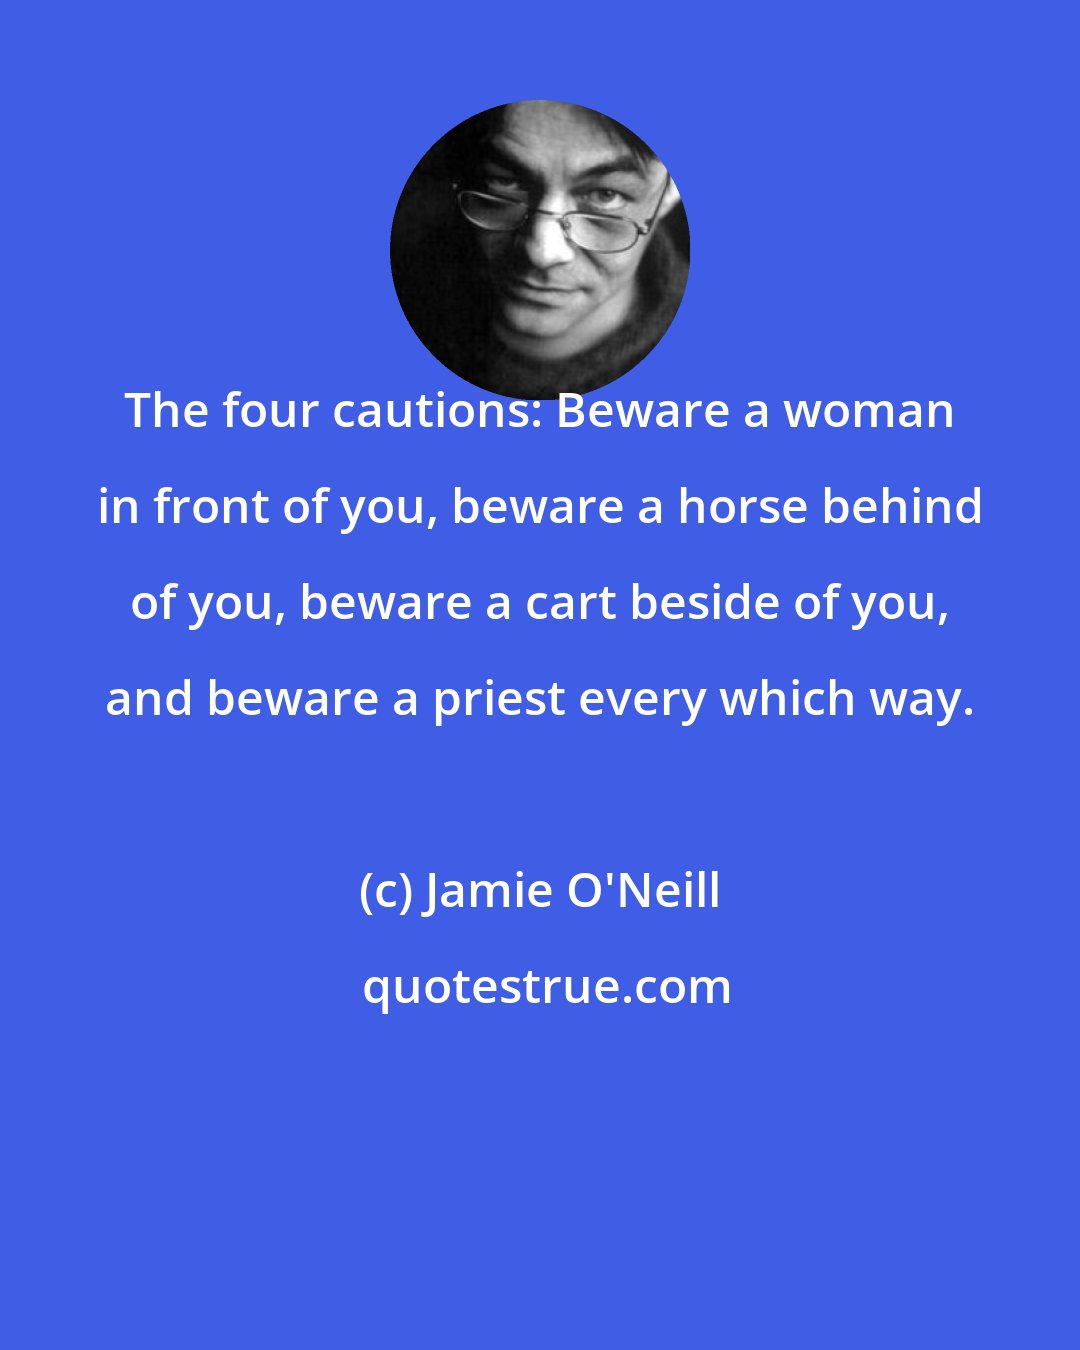 Jamie O'Neill: The four cautions: Beware a woman in front of you, beware a horse behind of you, beware a cart beside of you, and beware a priest every which way.